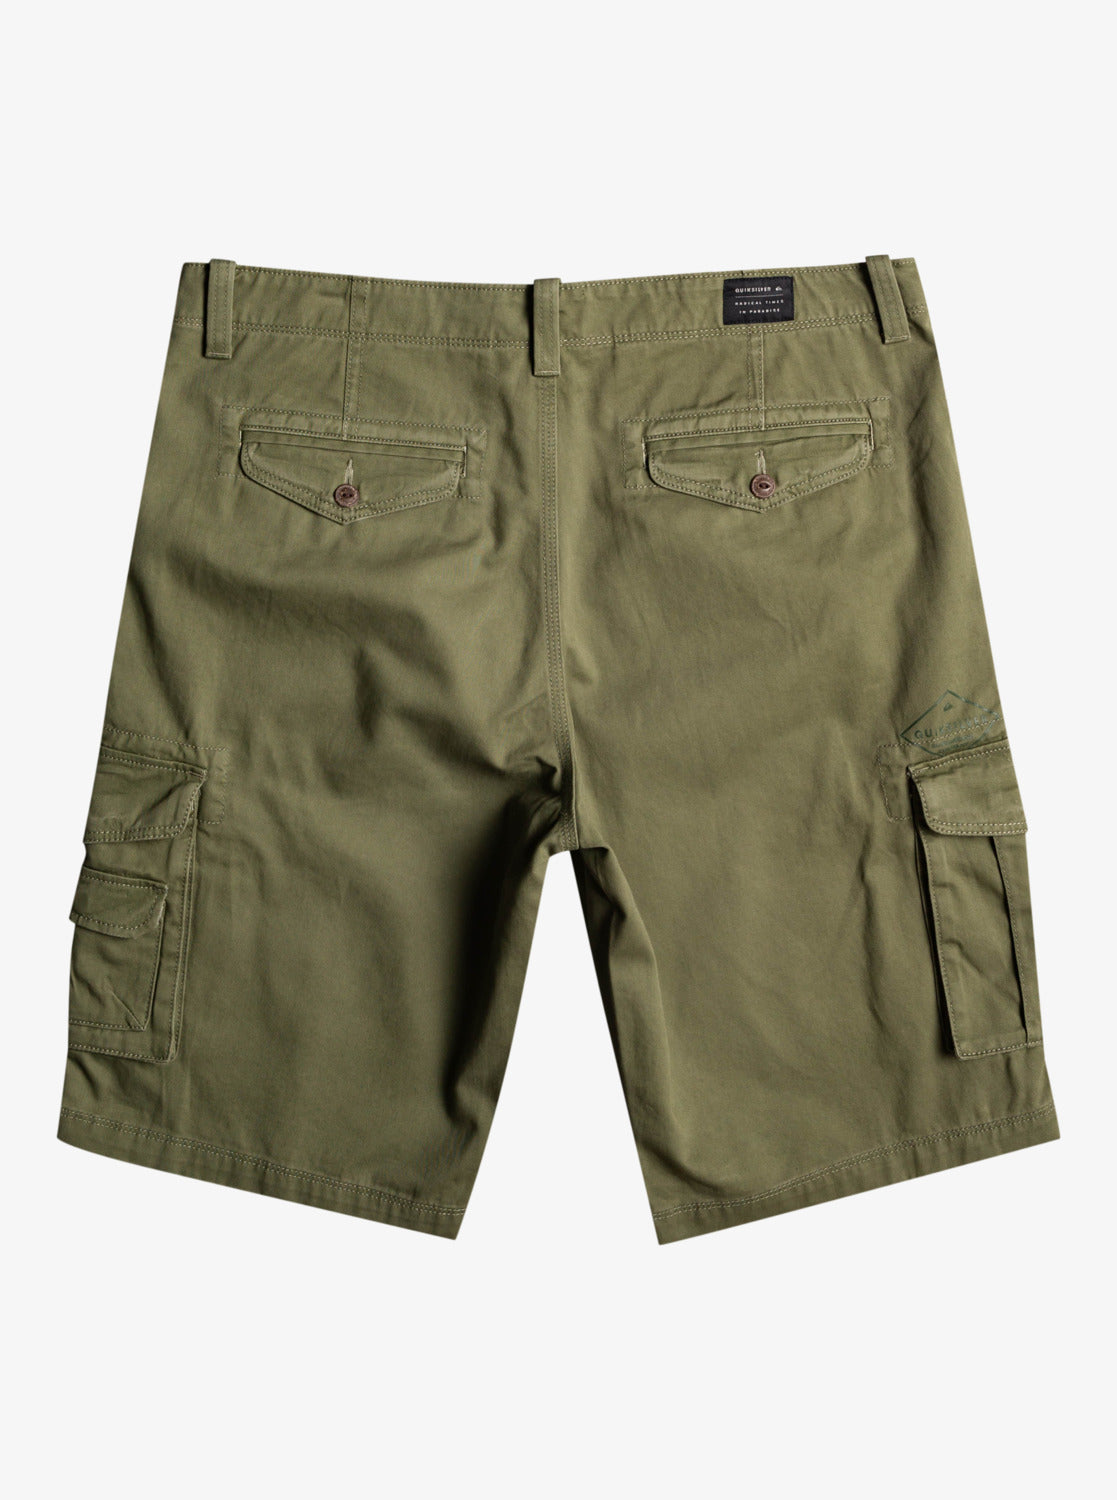 Quiksilver Crucial Battle Cargo Shorts in four leaf clover colourway from rear